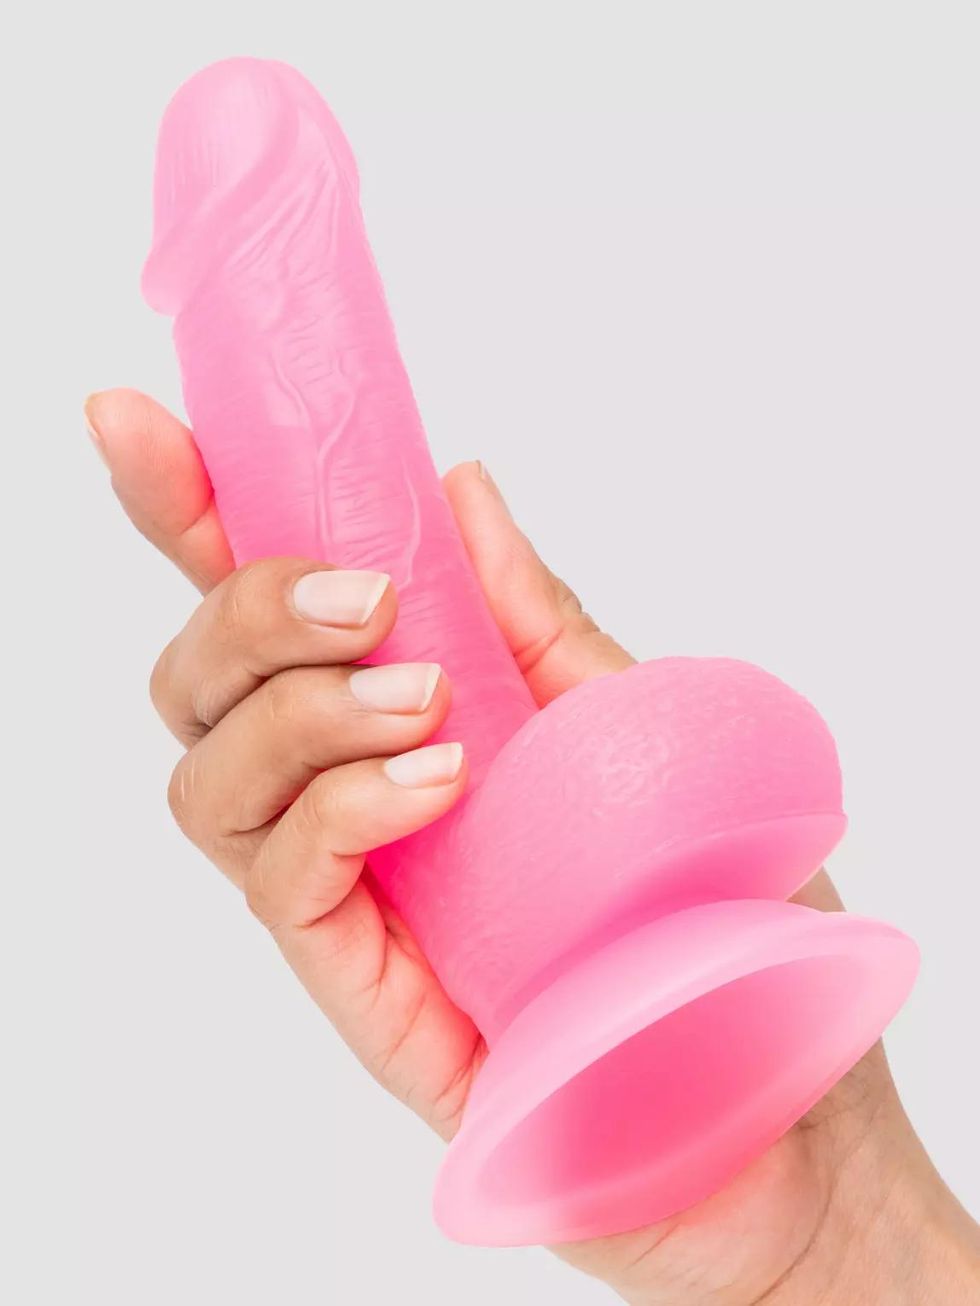 BASICS Glow In the Dark Realistic Suction Cup Dildo 6 Inch